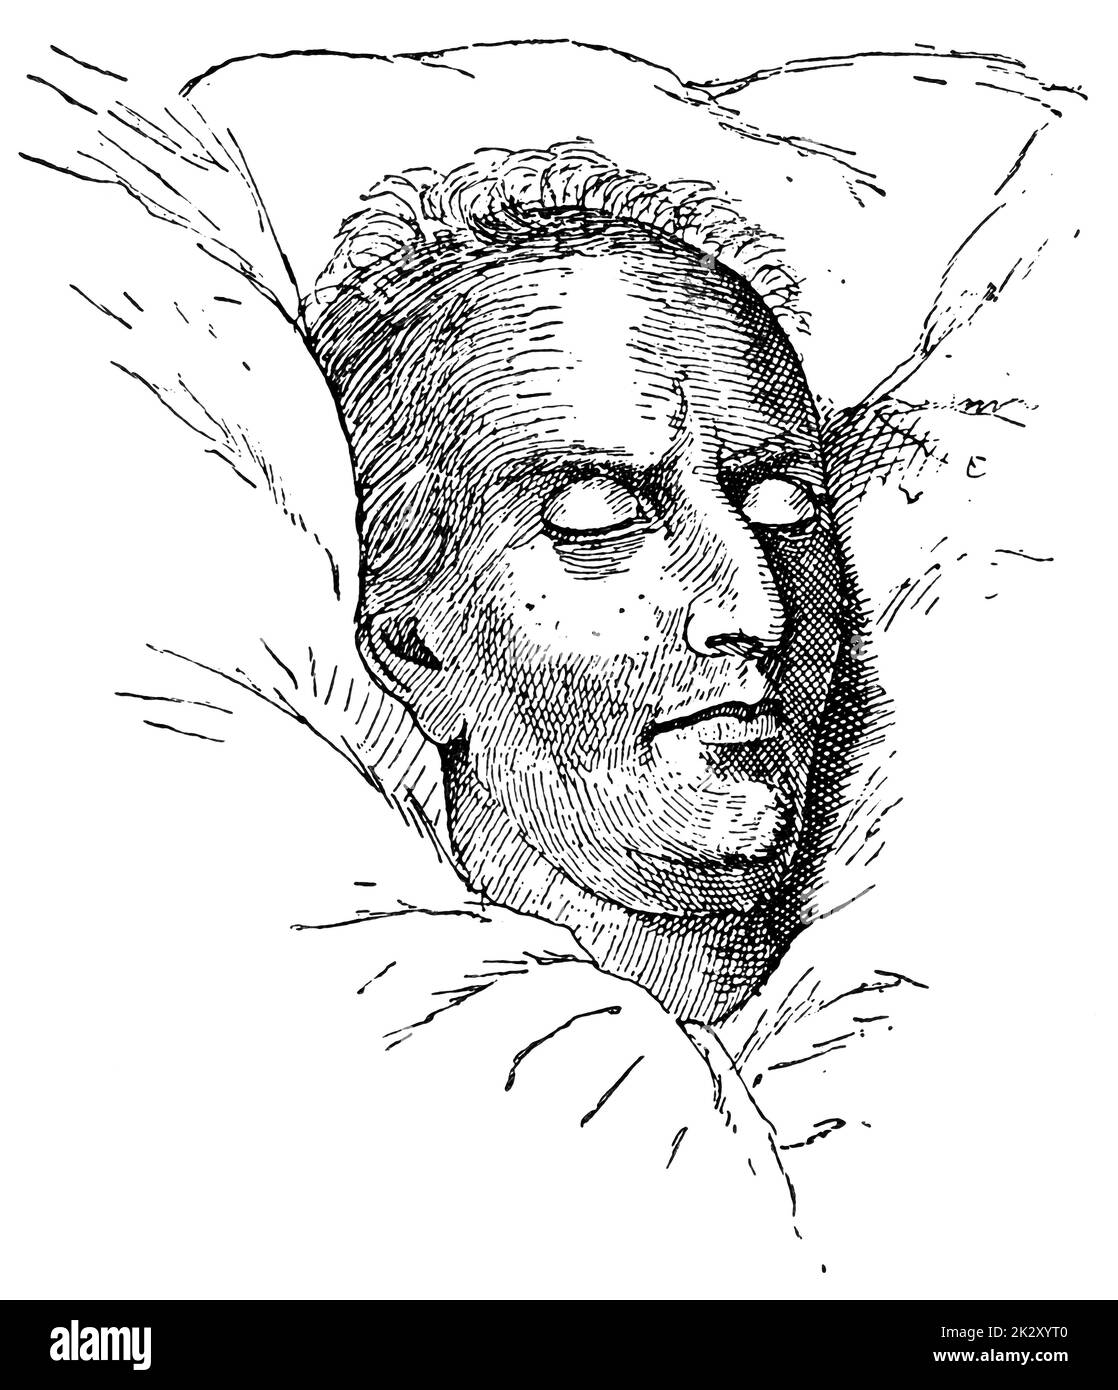 A death mask of Friedrich Schiller - a German poet, philosopher, physician, historian, and playwright. Illustration of the 19th century. White background. Stock Photo